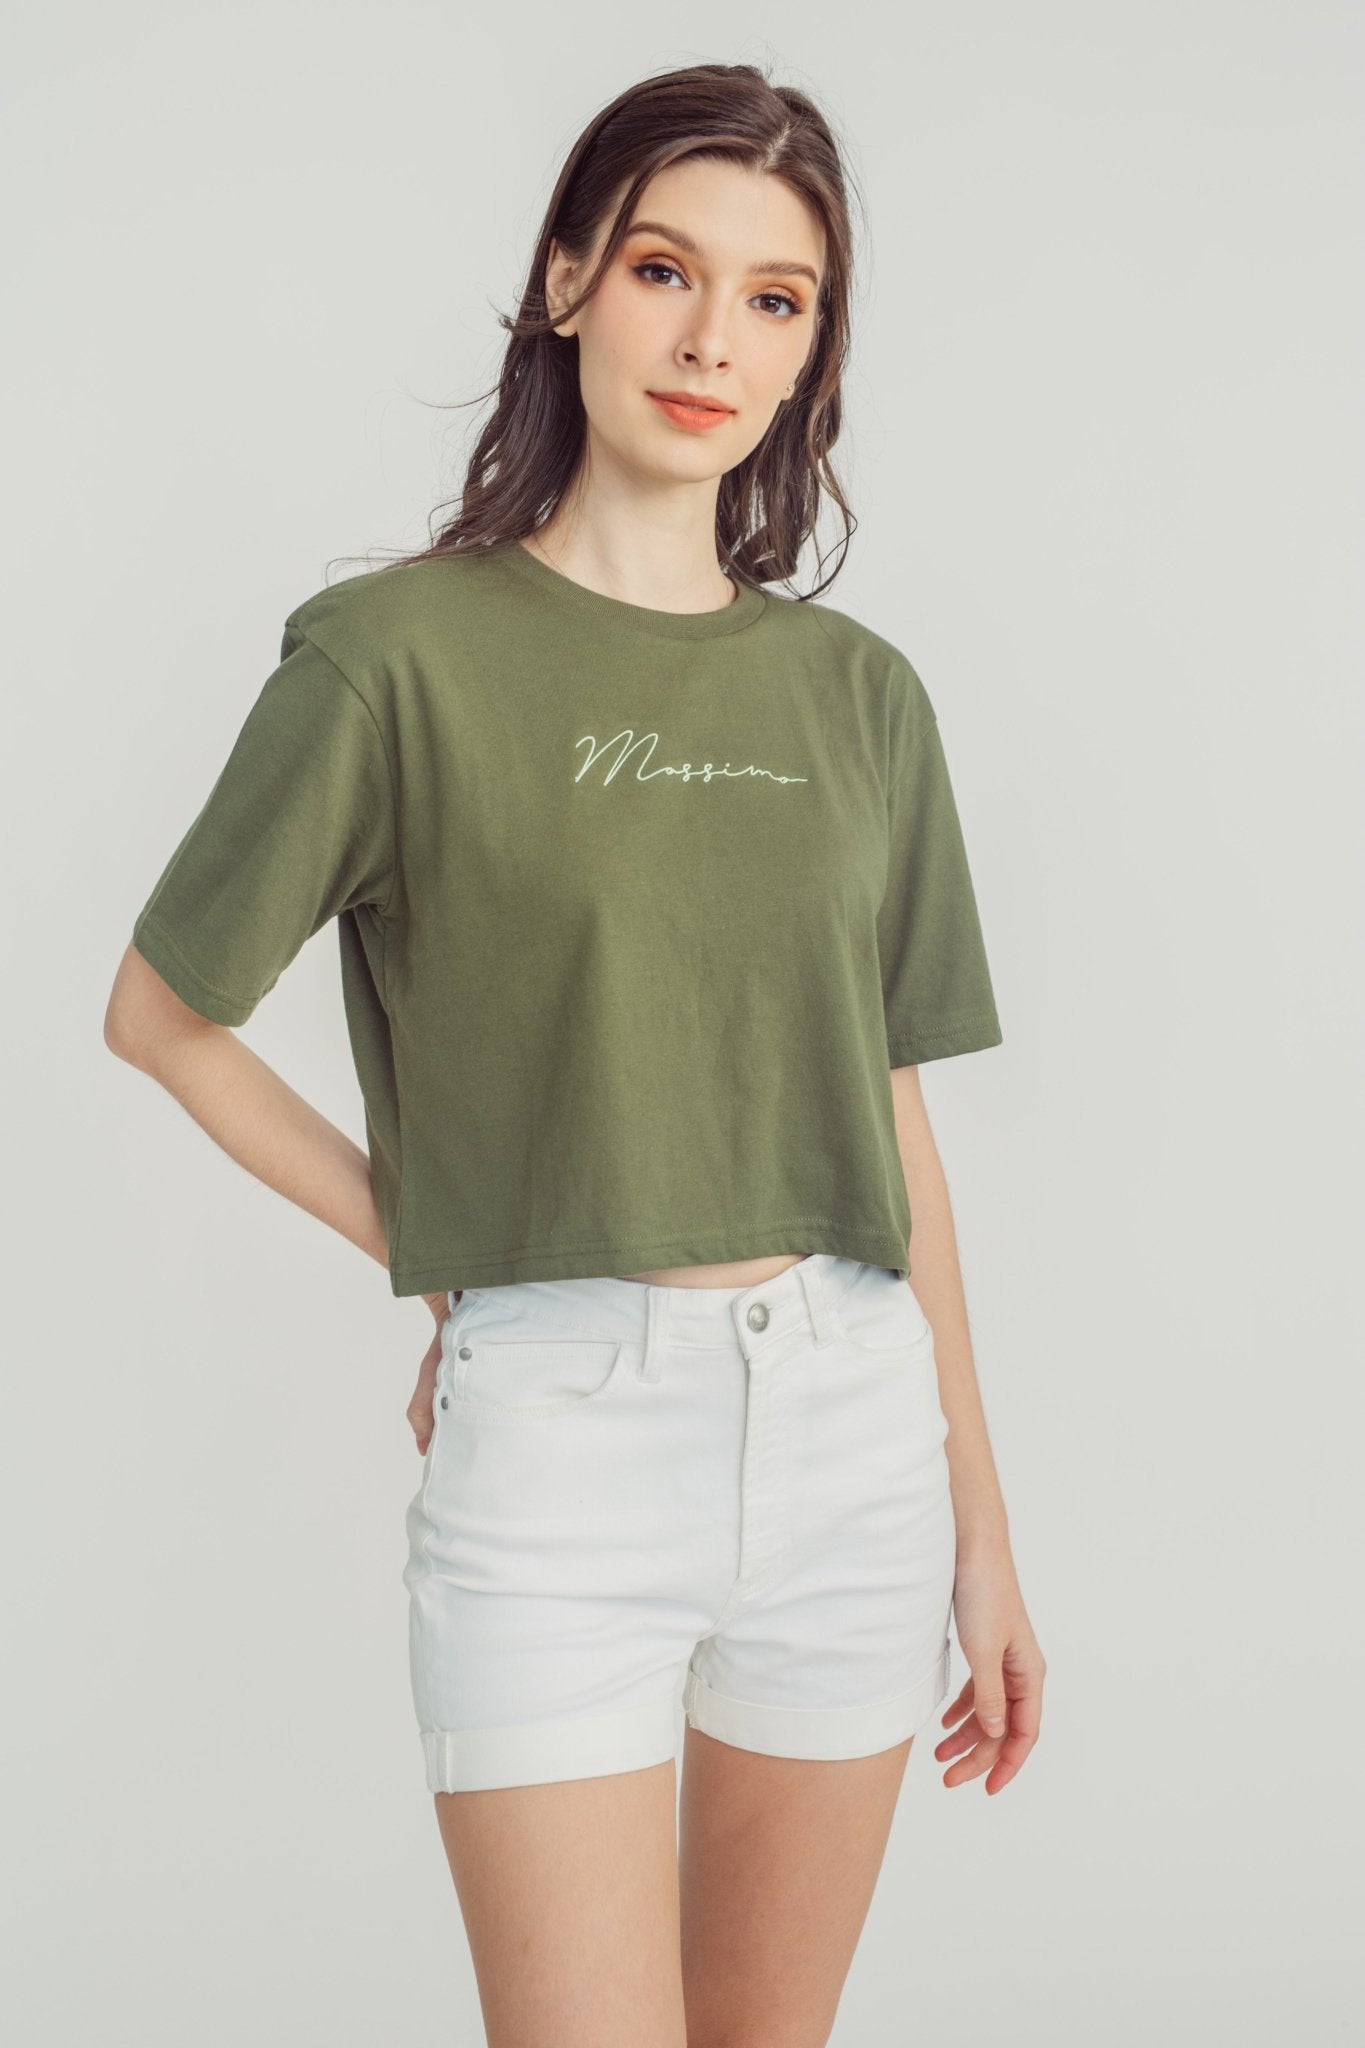 Olive with Mossimo Script Branding Modern Cropped Fit Tee - Mossimo PH